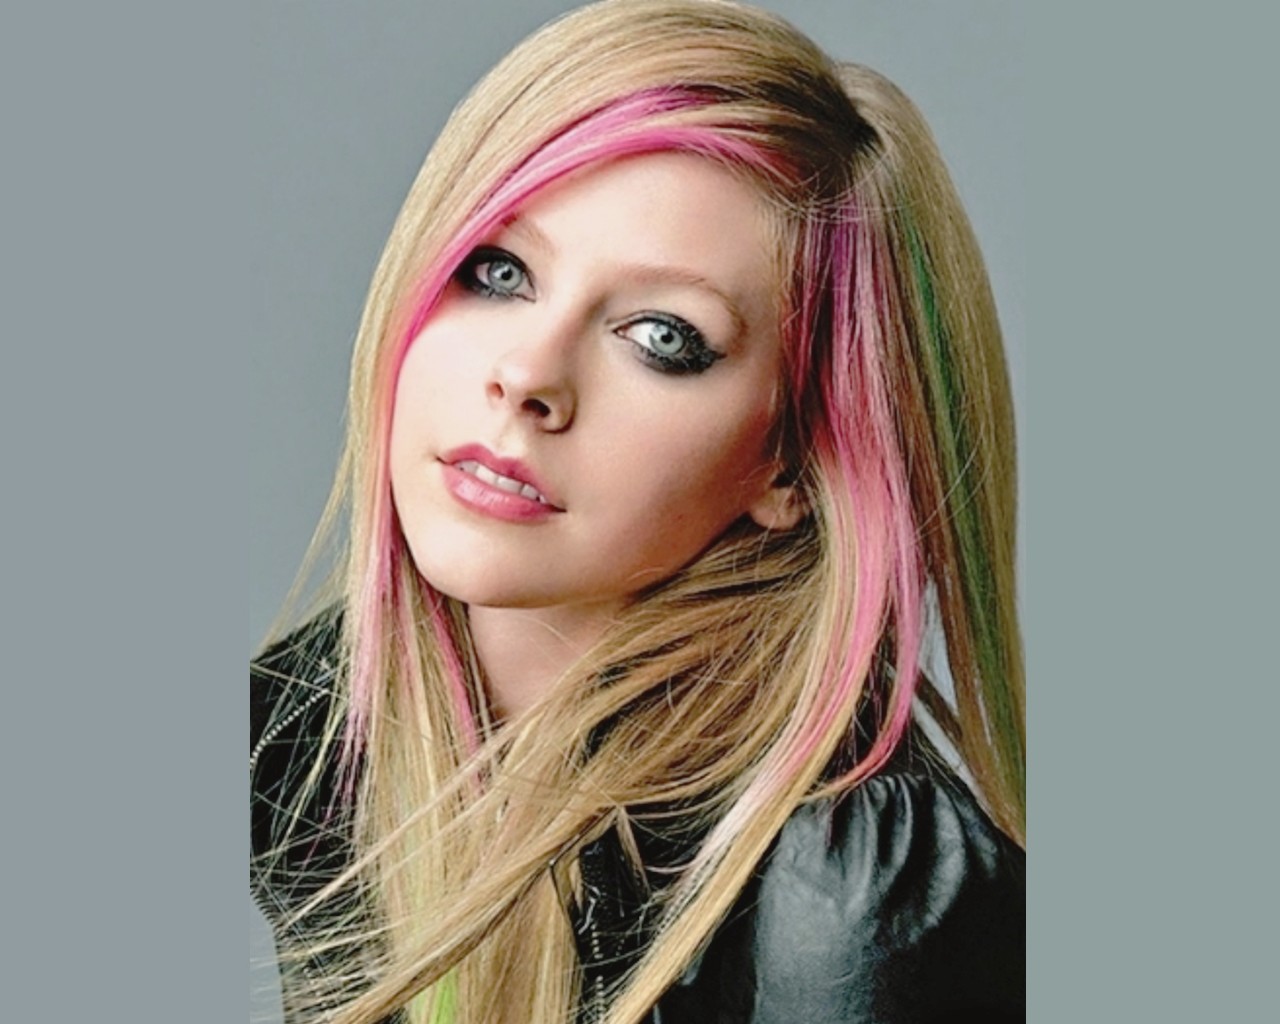 Avril Lavigne Wallpaper High Quality And Definition